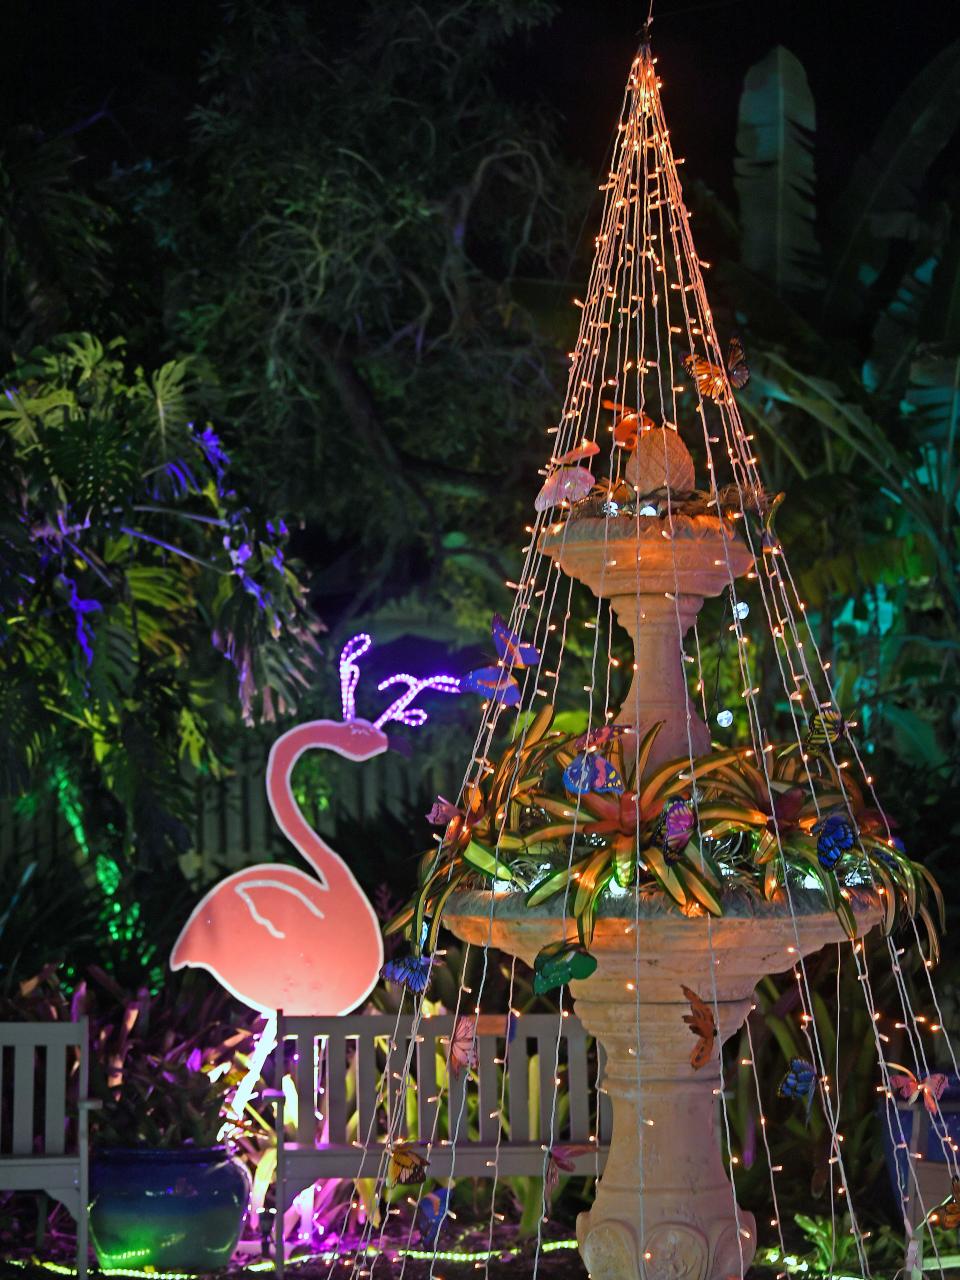 The 20th annual Lights in Bloom at Marie Selby Botanical Gardens continues on select nights this holiday weekend.